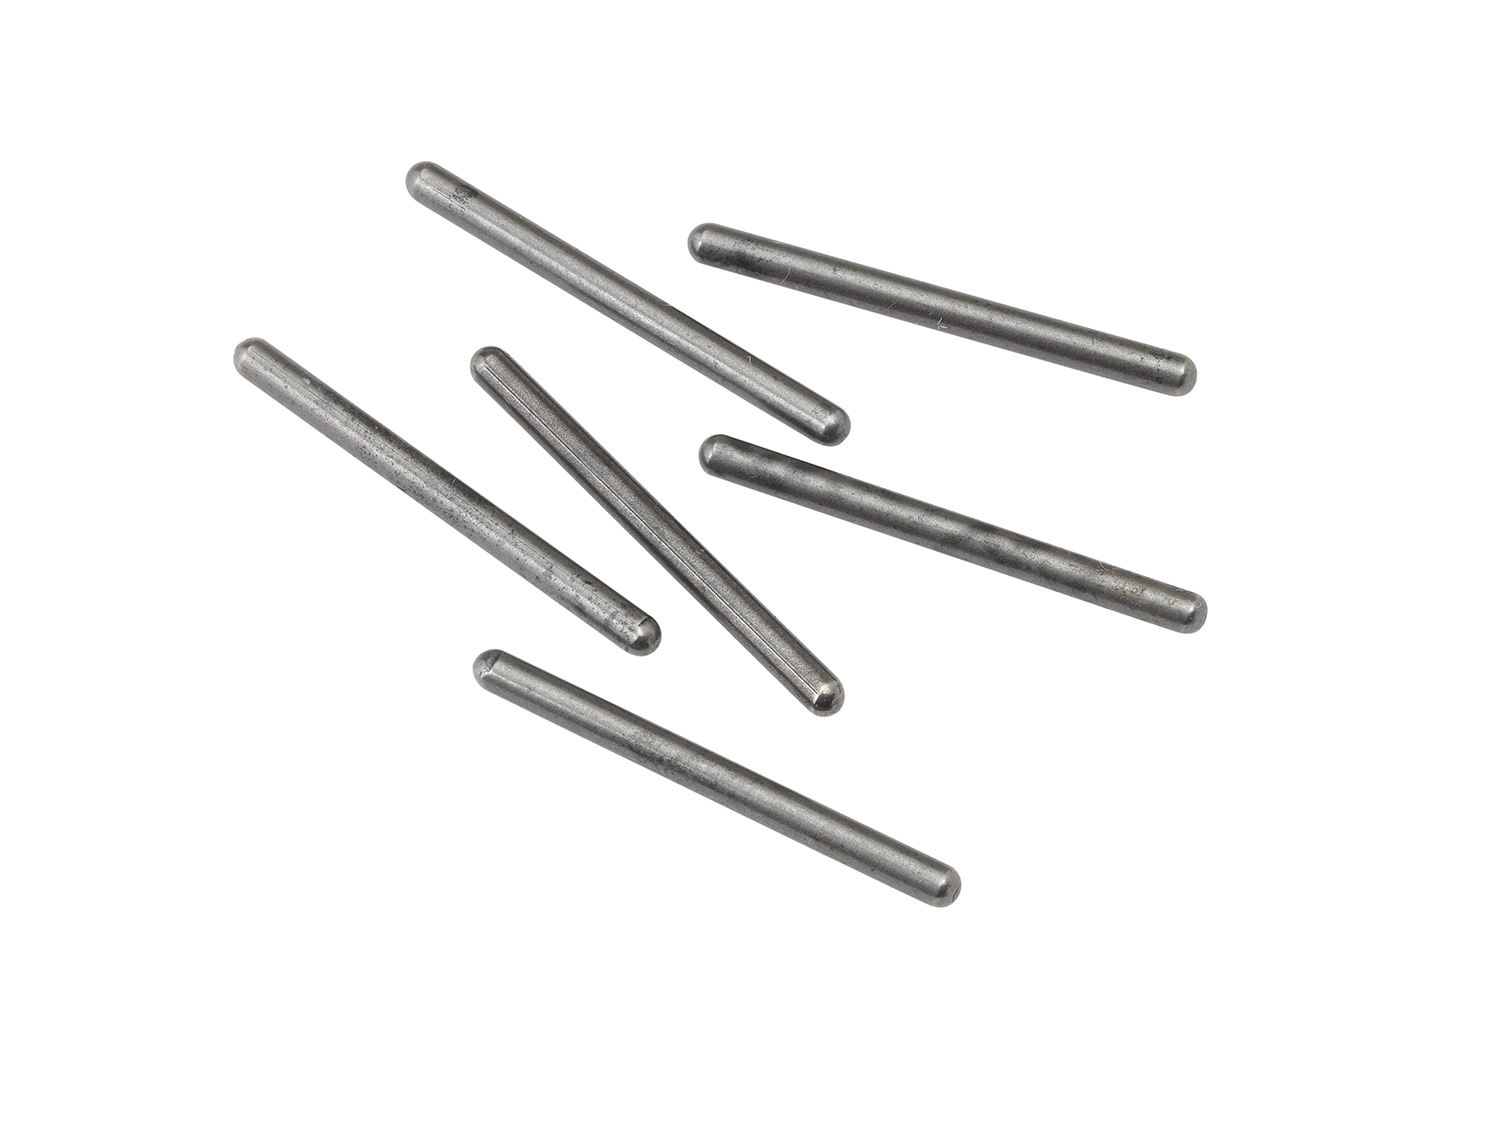 Hornady 060008 Universal Decapping Pins Stainless Steel 6Pk